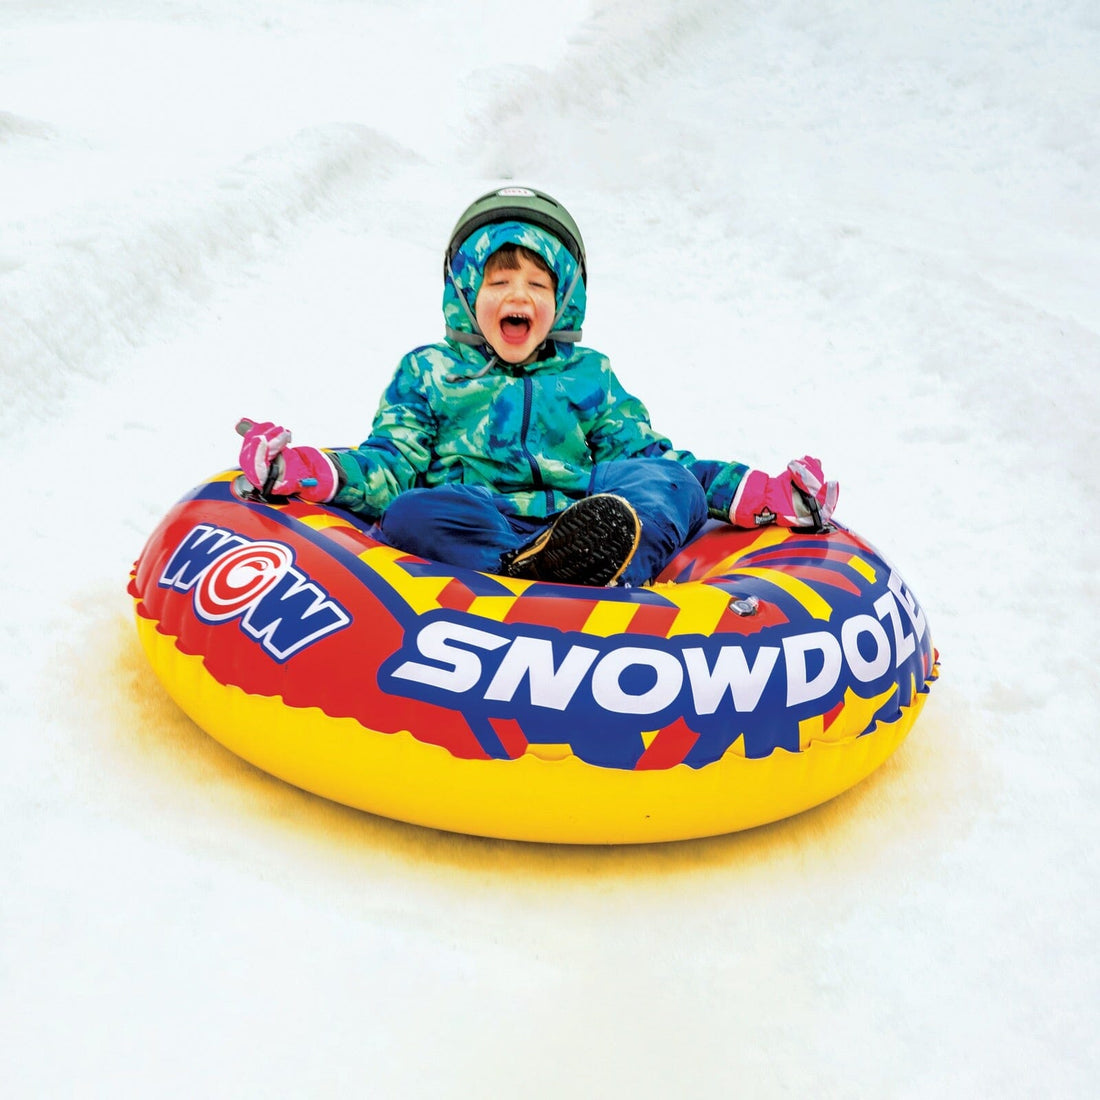 The Guide for Holiday Sledding